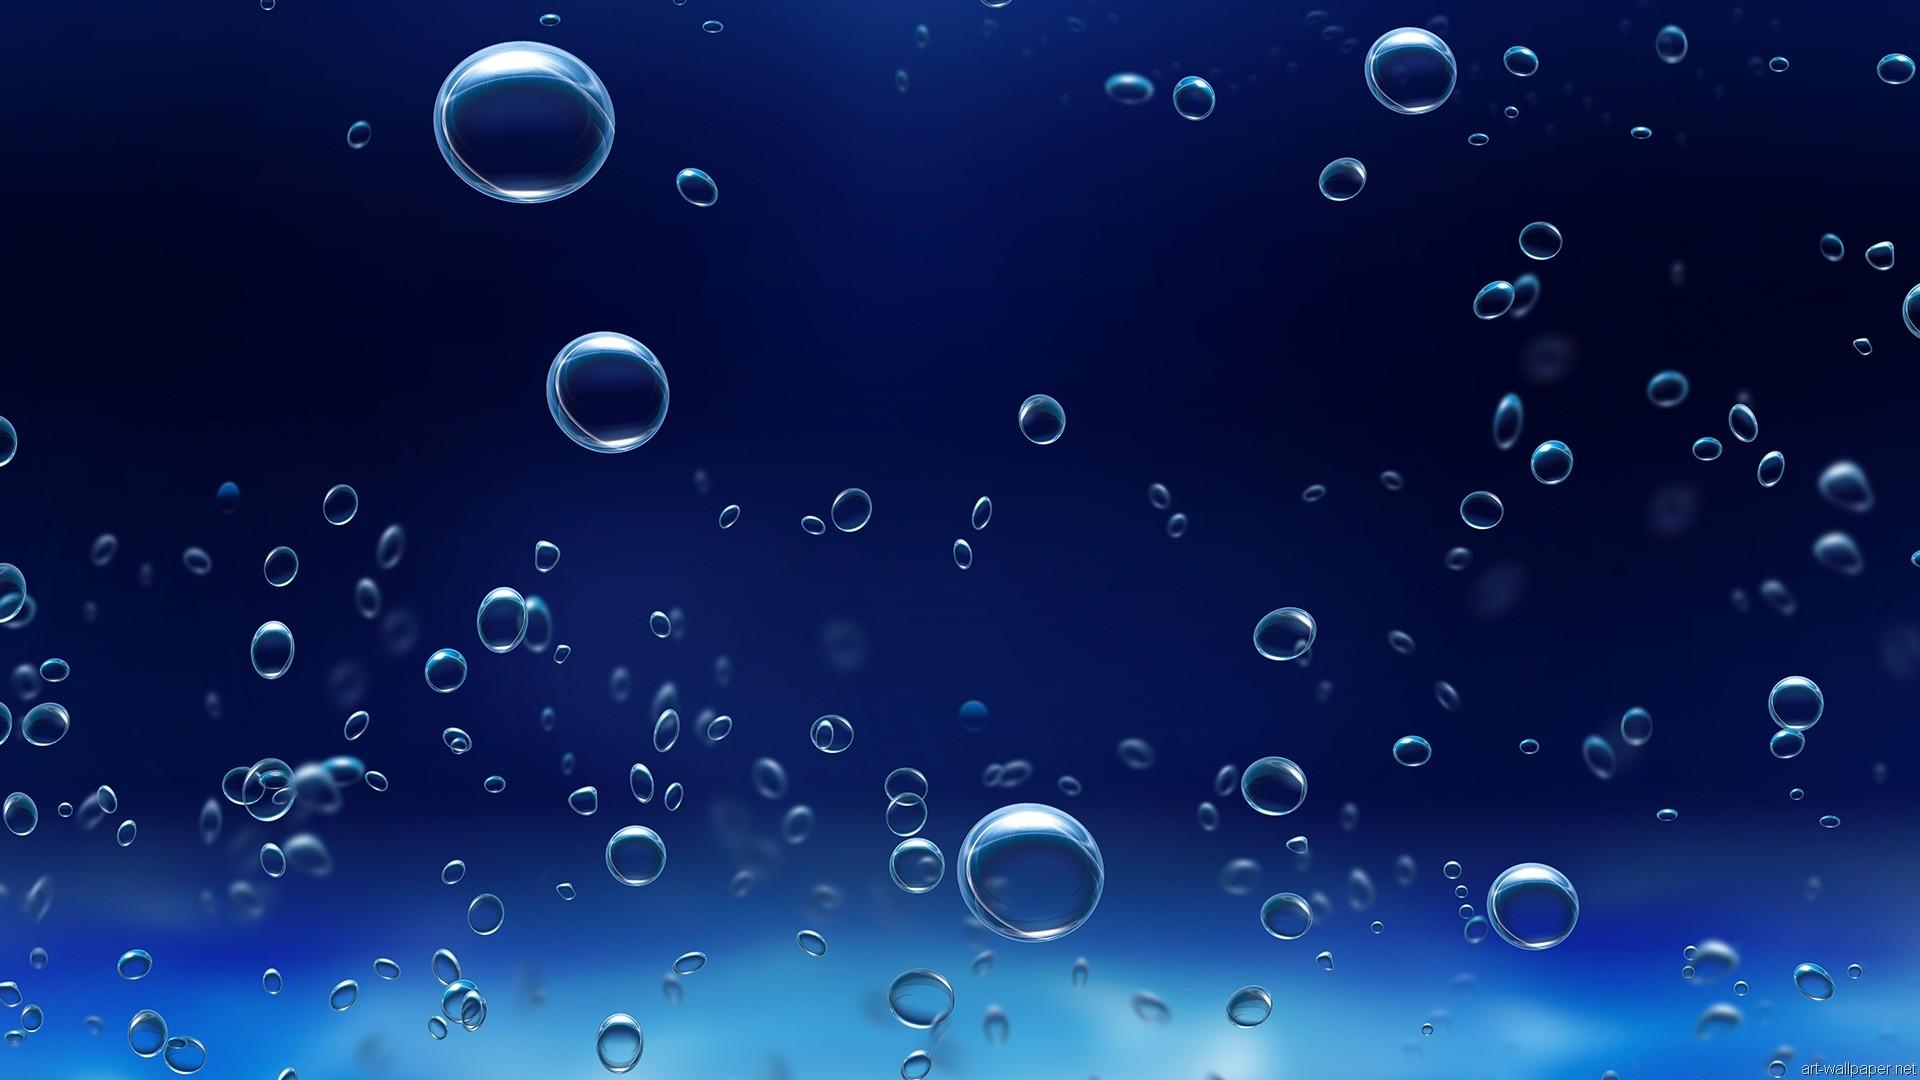 Water bubbles background wallpaper | (41084)